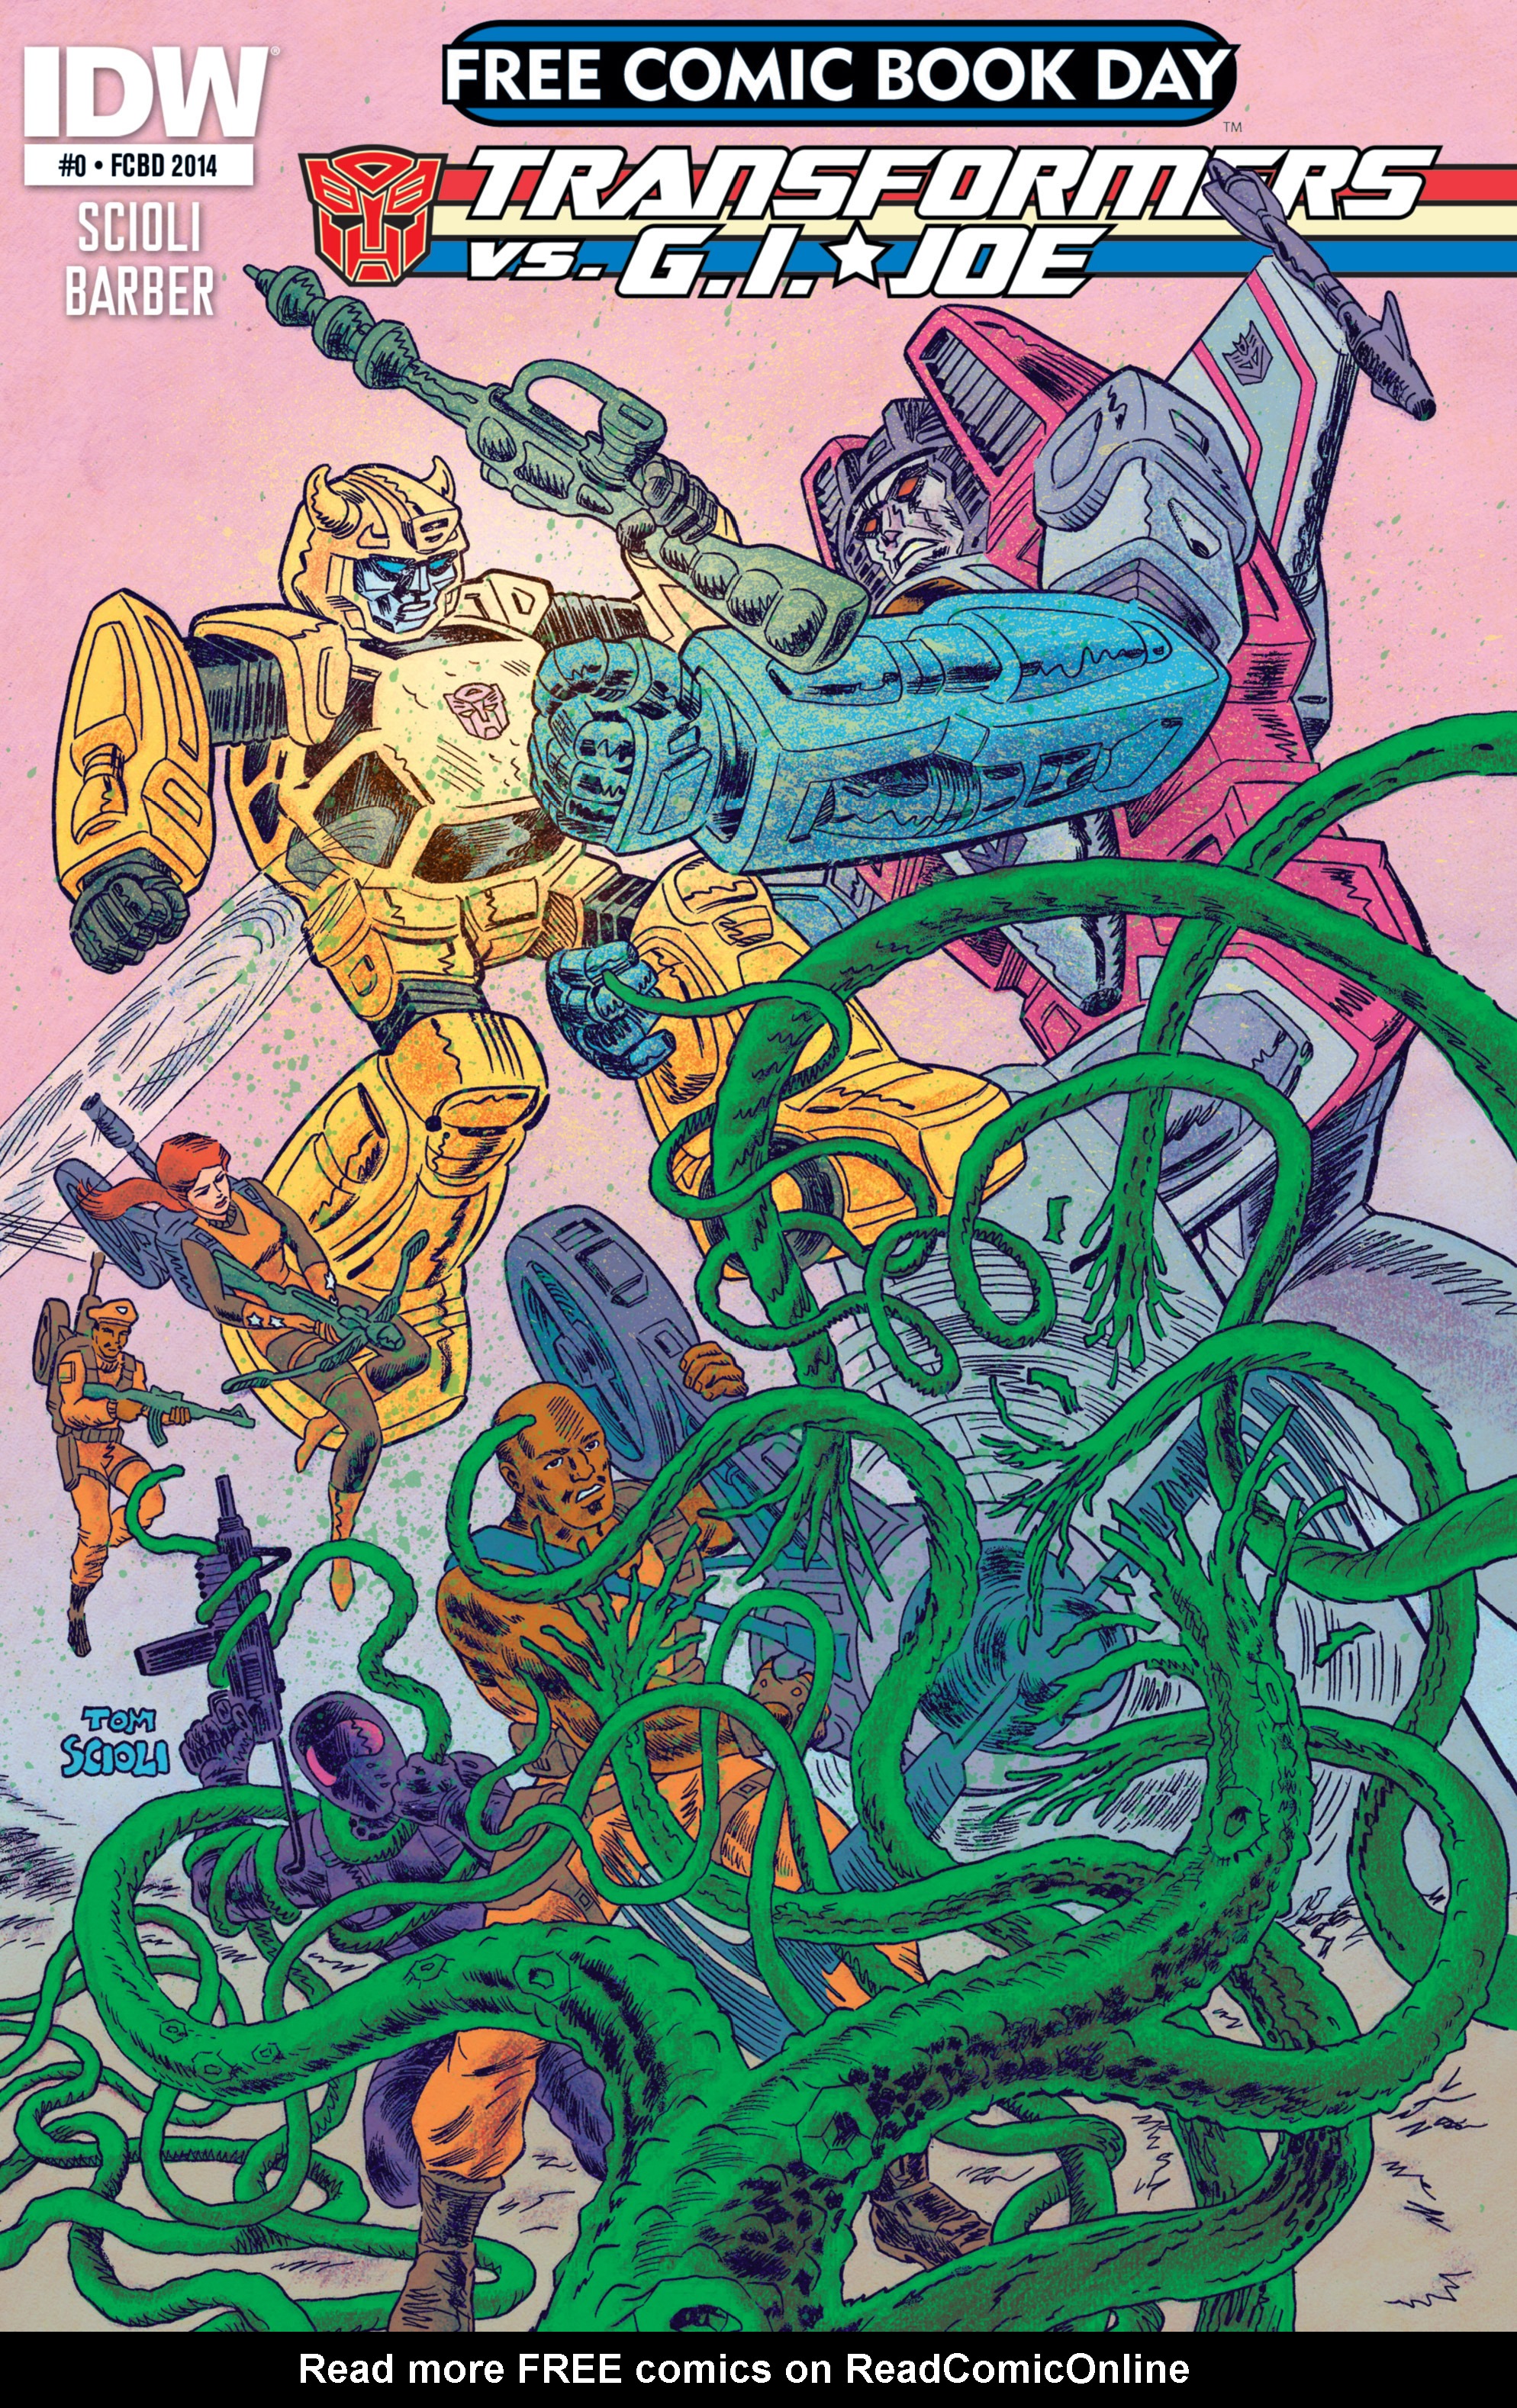 Read online Free Comic Book Day 2014 comic -  Issue # The Transformers vs. G.I. Joe 00 - 1